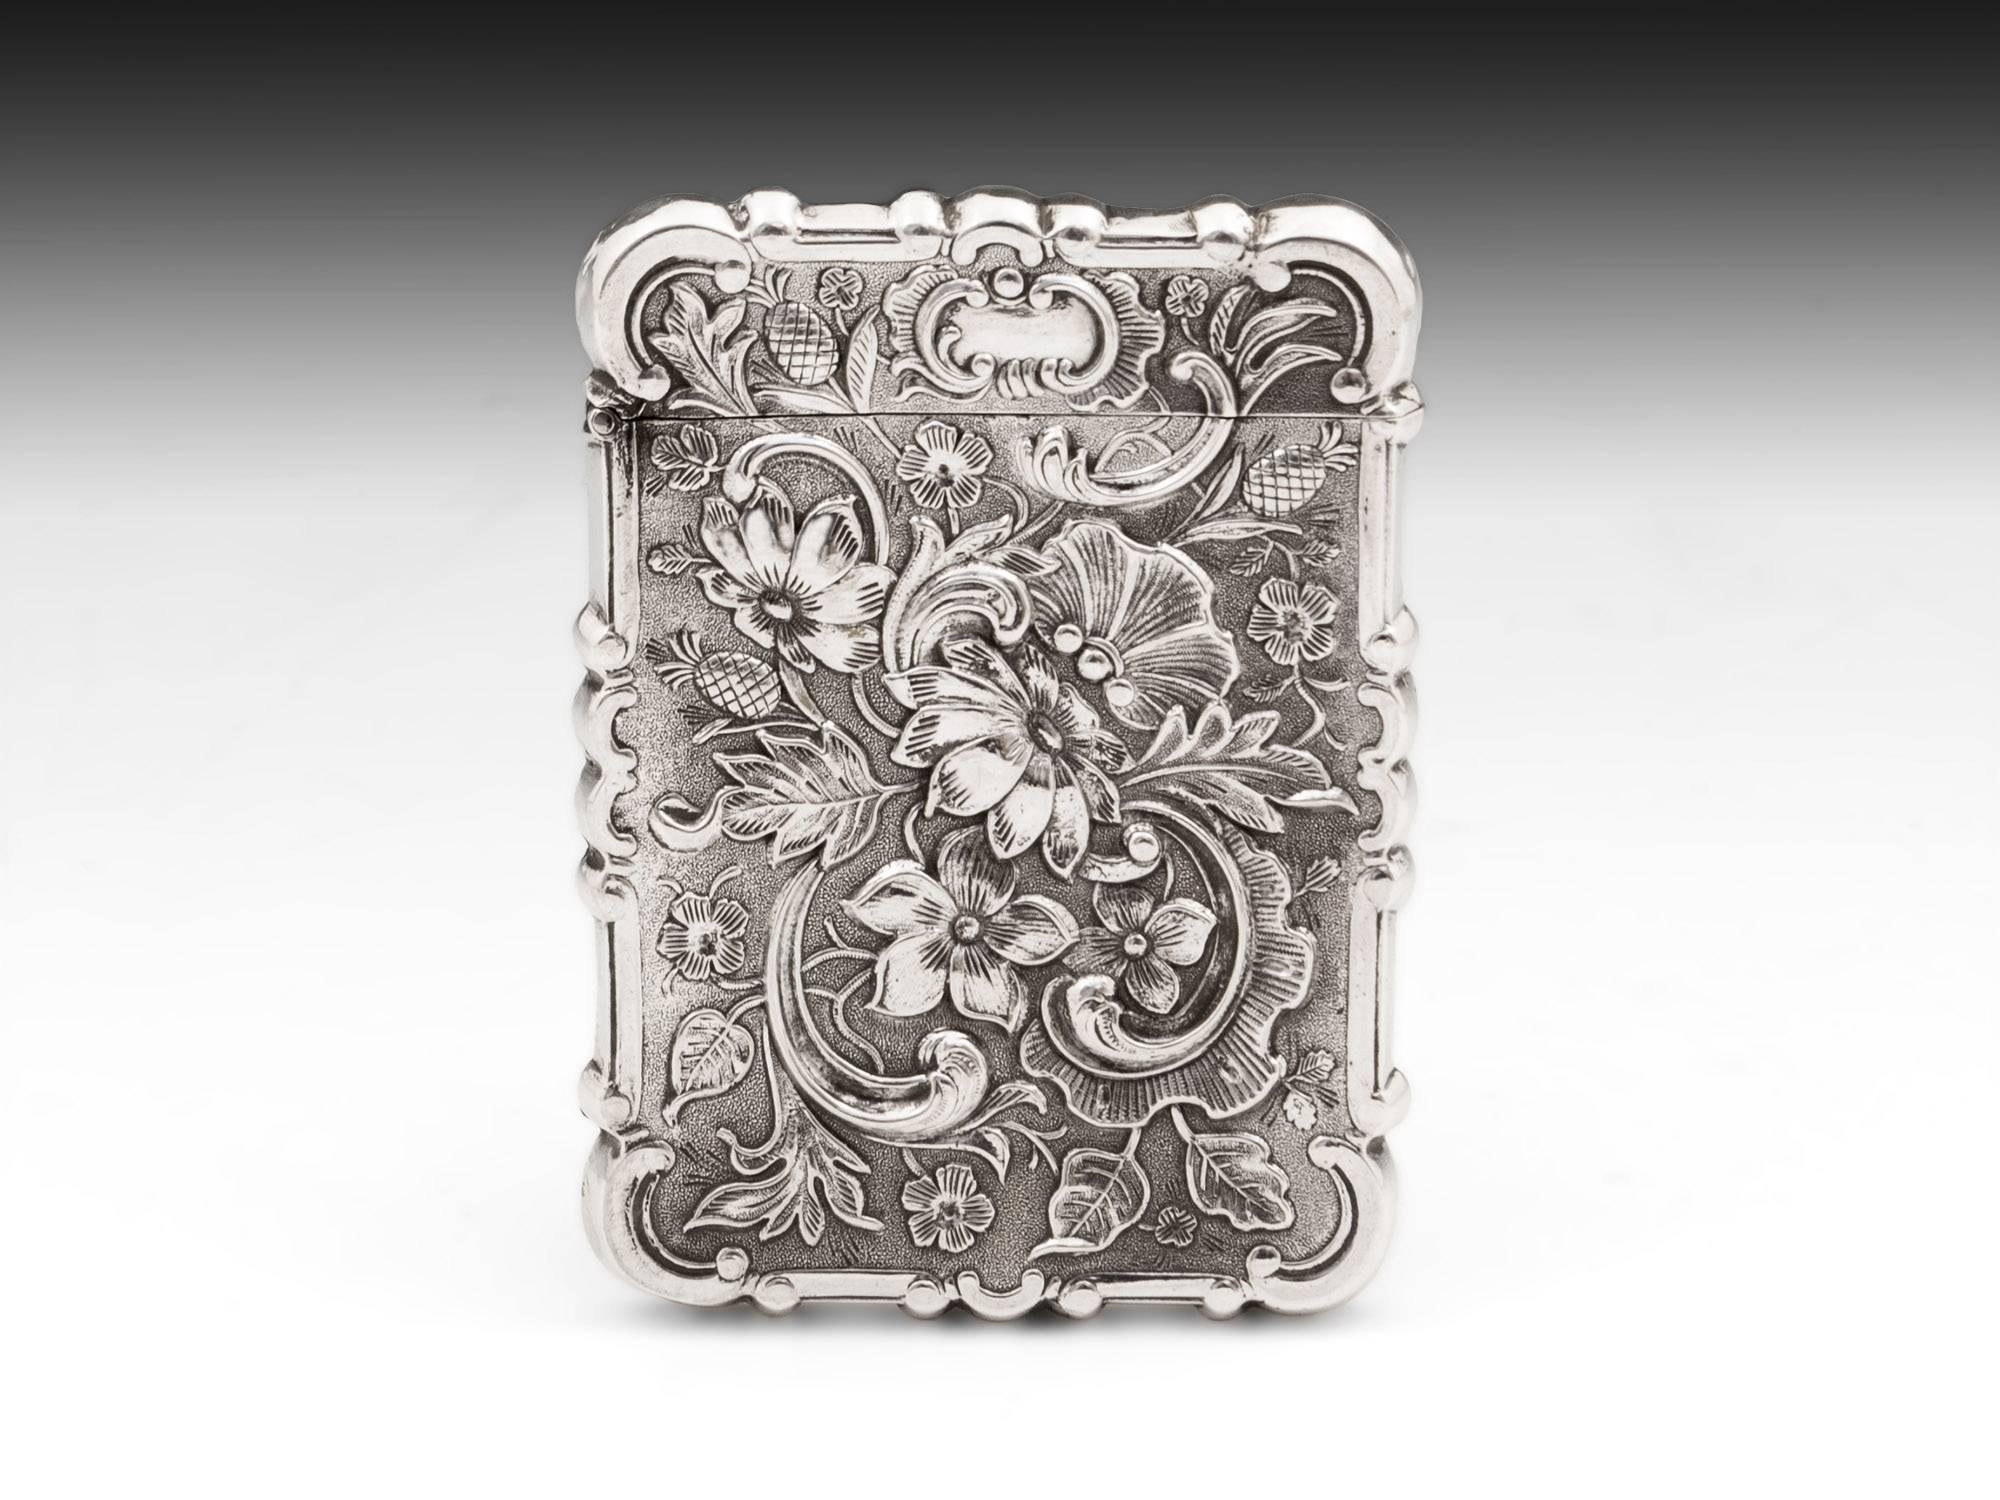 Ornate Silver Card Case by American Silversmith Leonard & Wilson. With a castle view on one side, and a beautiful floral design on the other and scrolling edge shape to the castle card case itself. 

On the inside edge of the lid close it is